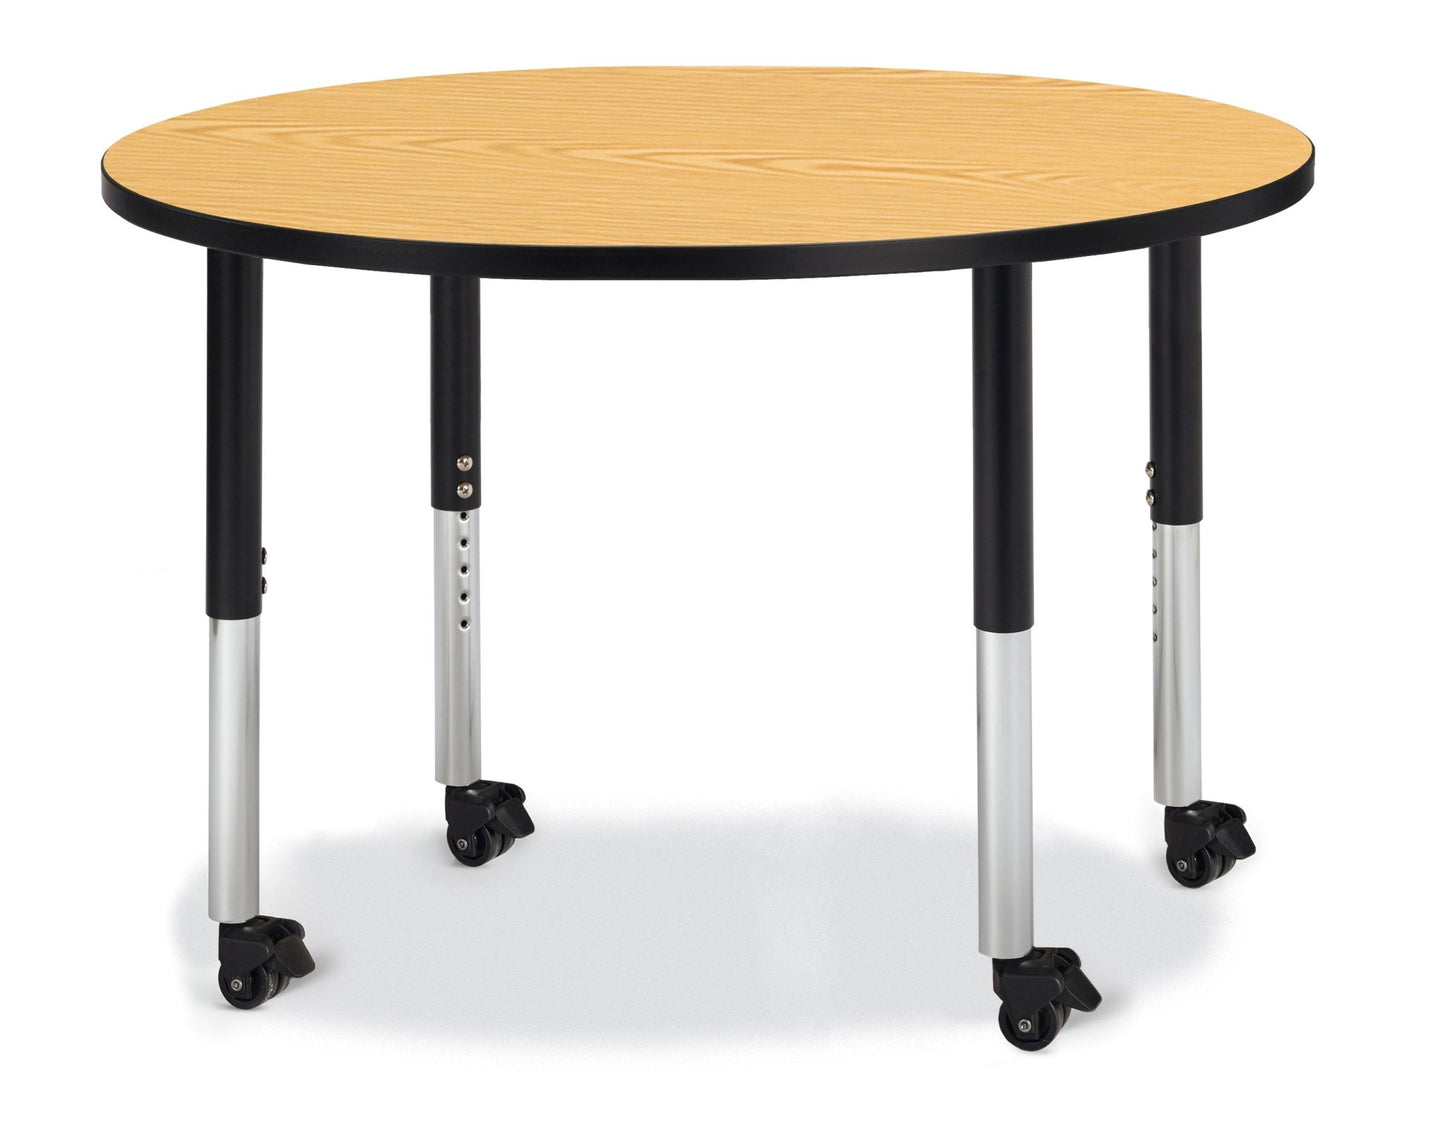 Jonti-Craft Round Activity Table with Heavy Duty Laminate Top 42" Diameter - Mobile Height Adjustable Legs (20" - 31") - SchoolOutlet